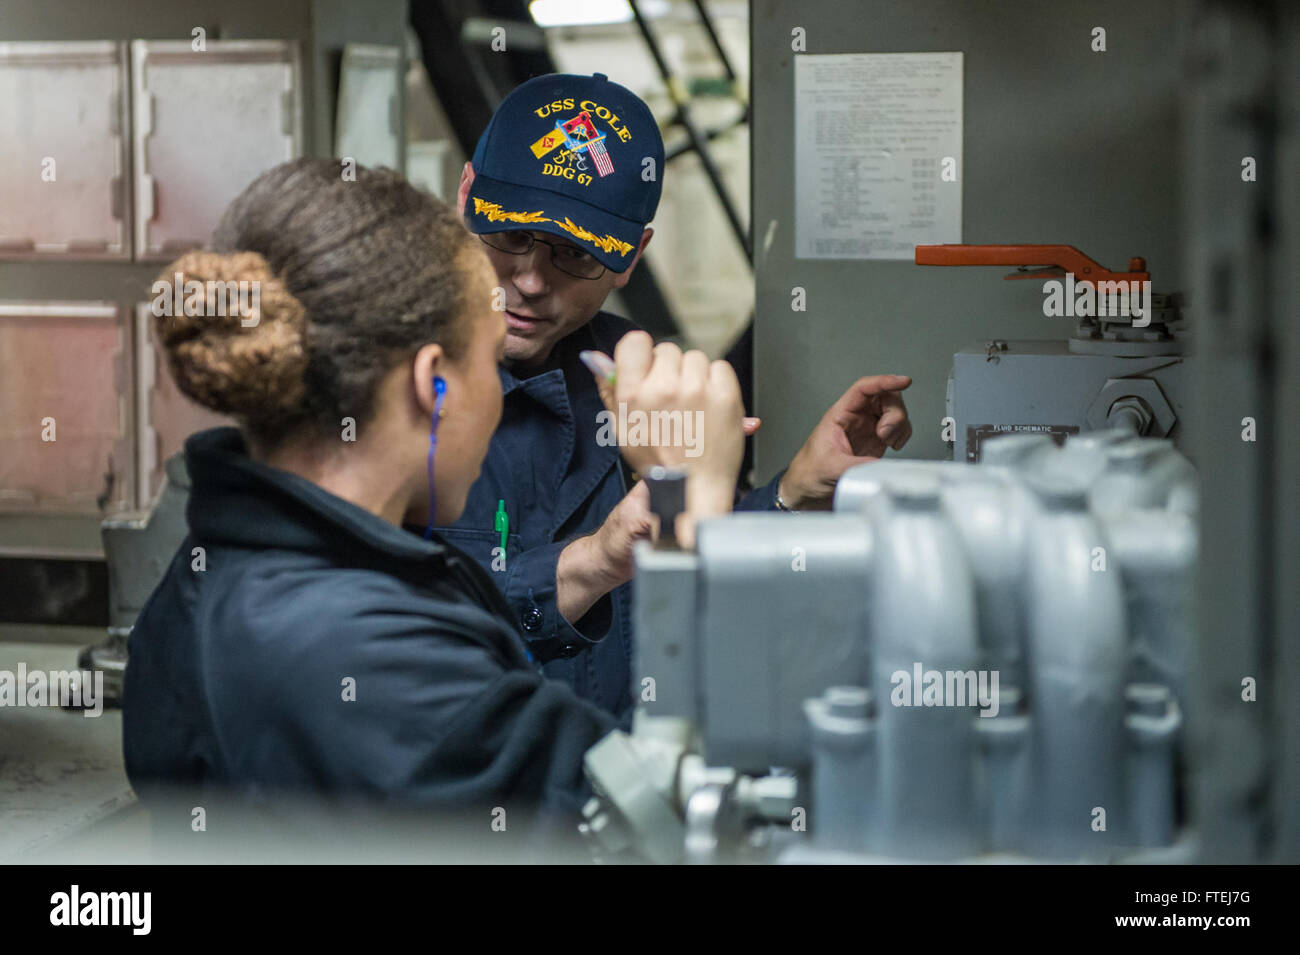 MEDITERRANEAN SEA (November 10, 2014) – Cmdr. James Quaresimo, from Norfolk, explains propulsion fundamentals to Ensign Tamarah Ware, from Norfolk, aboard the USS Cole (DDG 67). Cole is an Arleigh Burke-class guided-missile destroyer, homeported in Norfolk, Va., conducting naval operations in the U.S. 6th Fleet area of operations in support of U.S. national security interests in Europe. Stock Photo